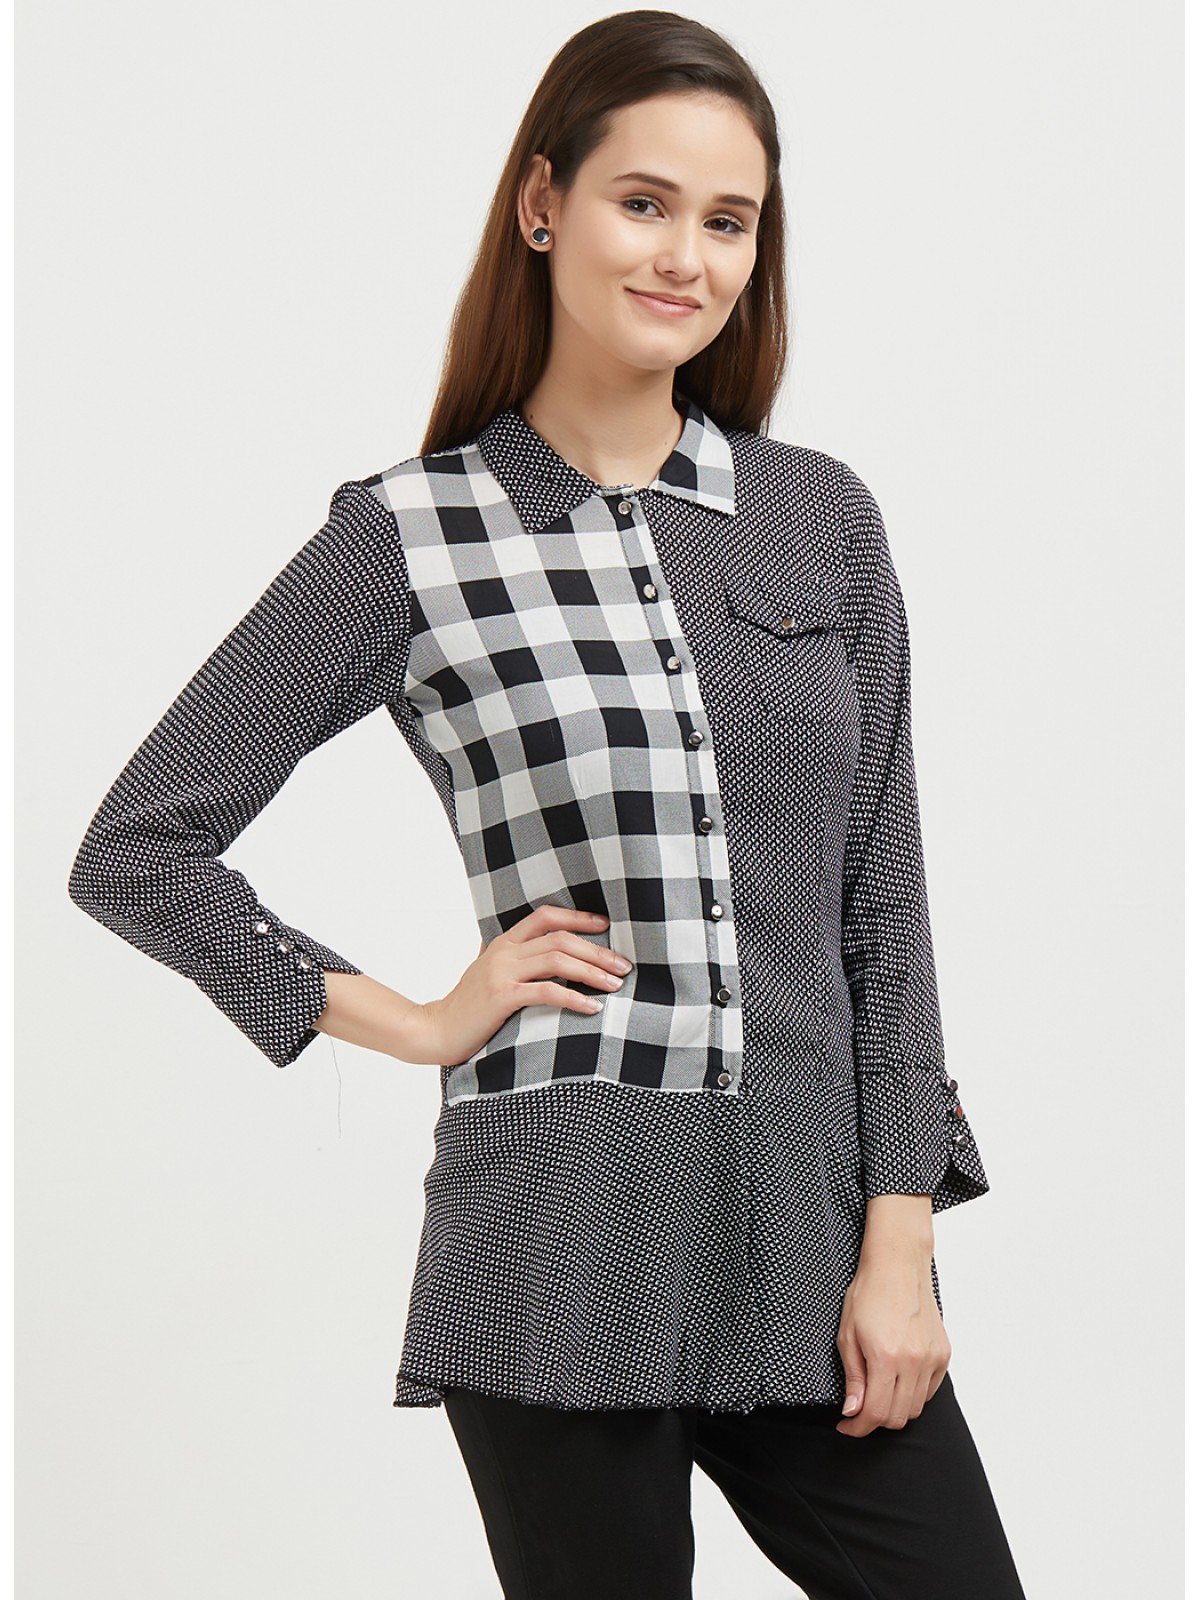 Uneven Black Printed With Side Checks Panel Shirt